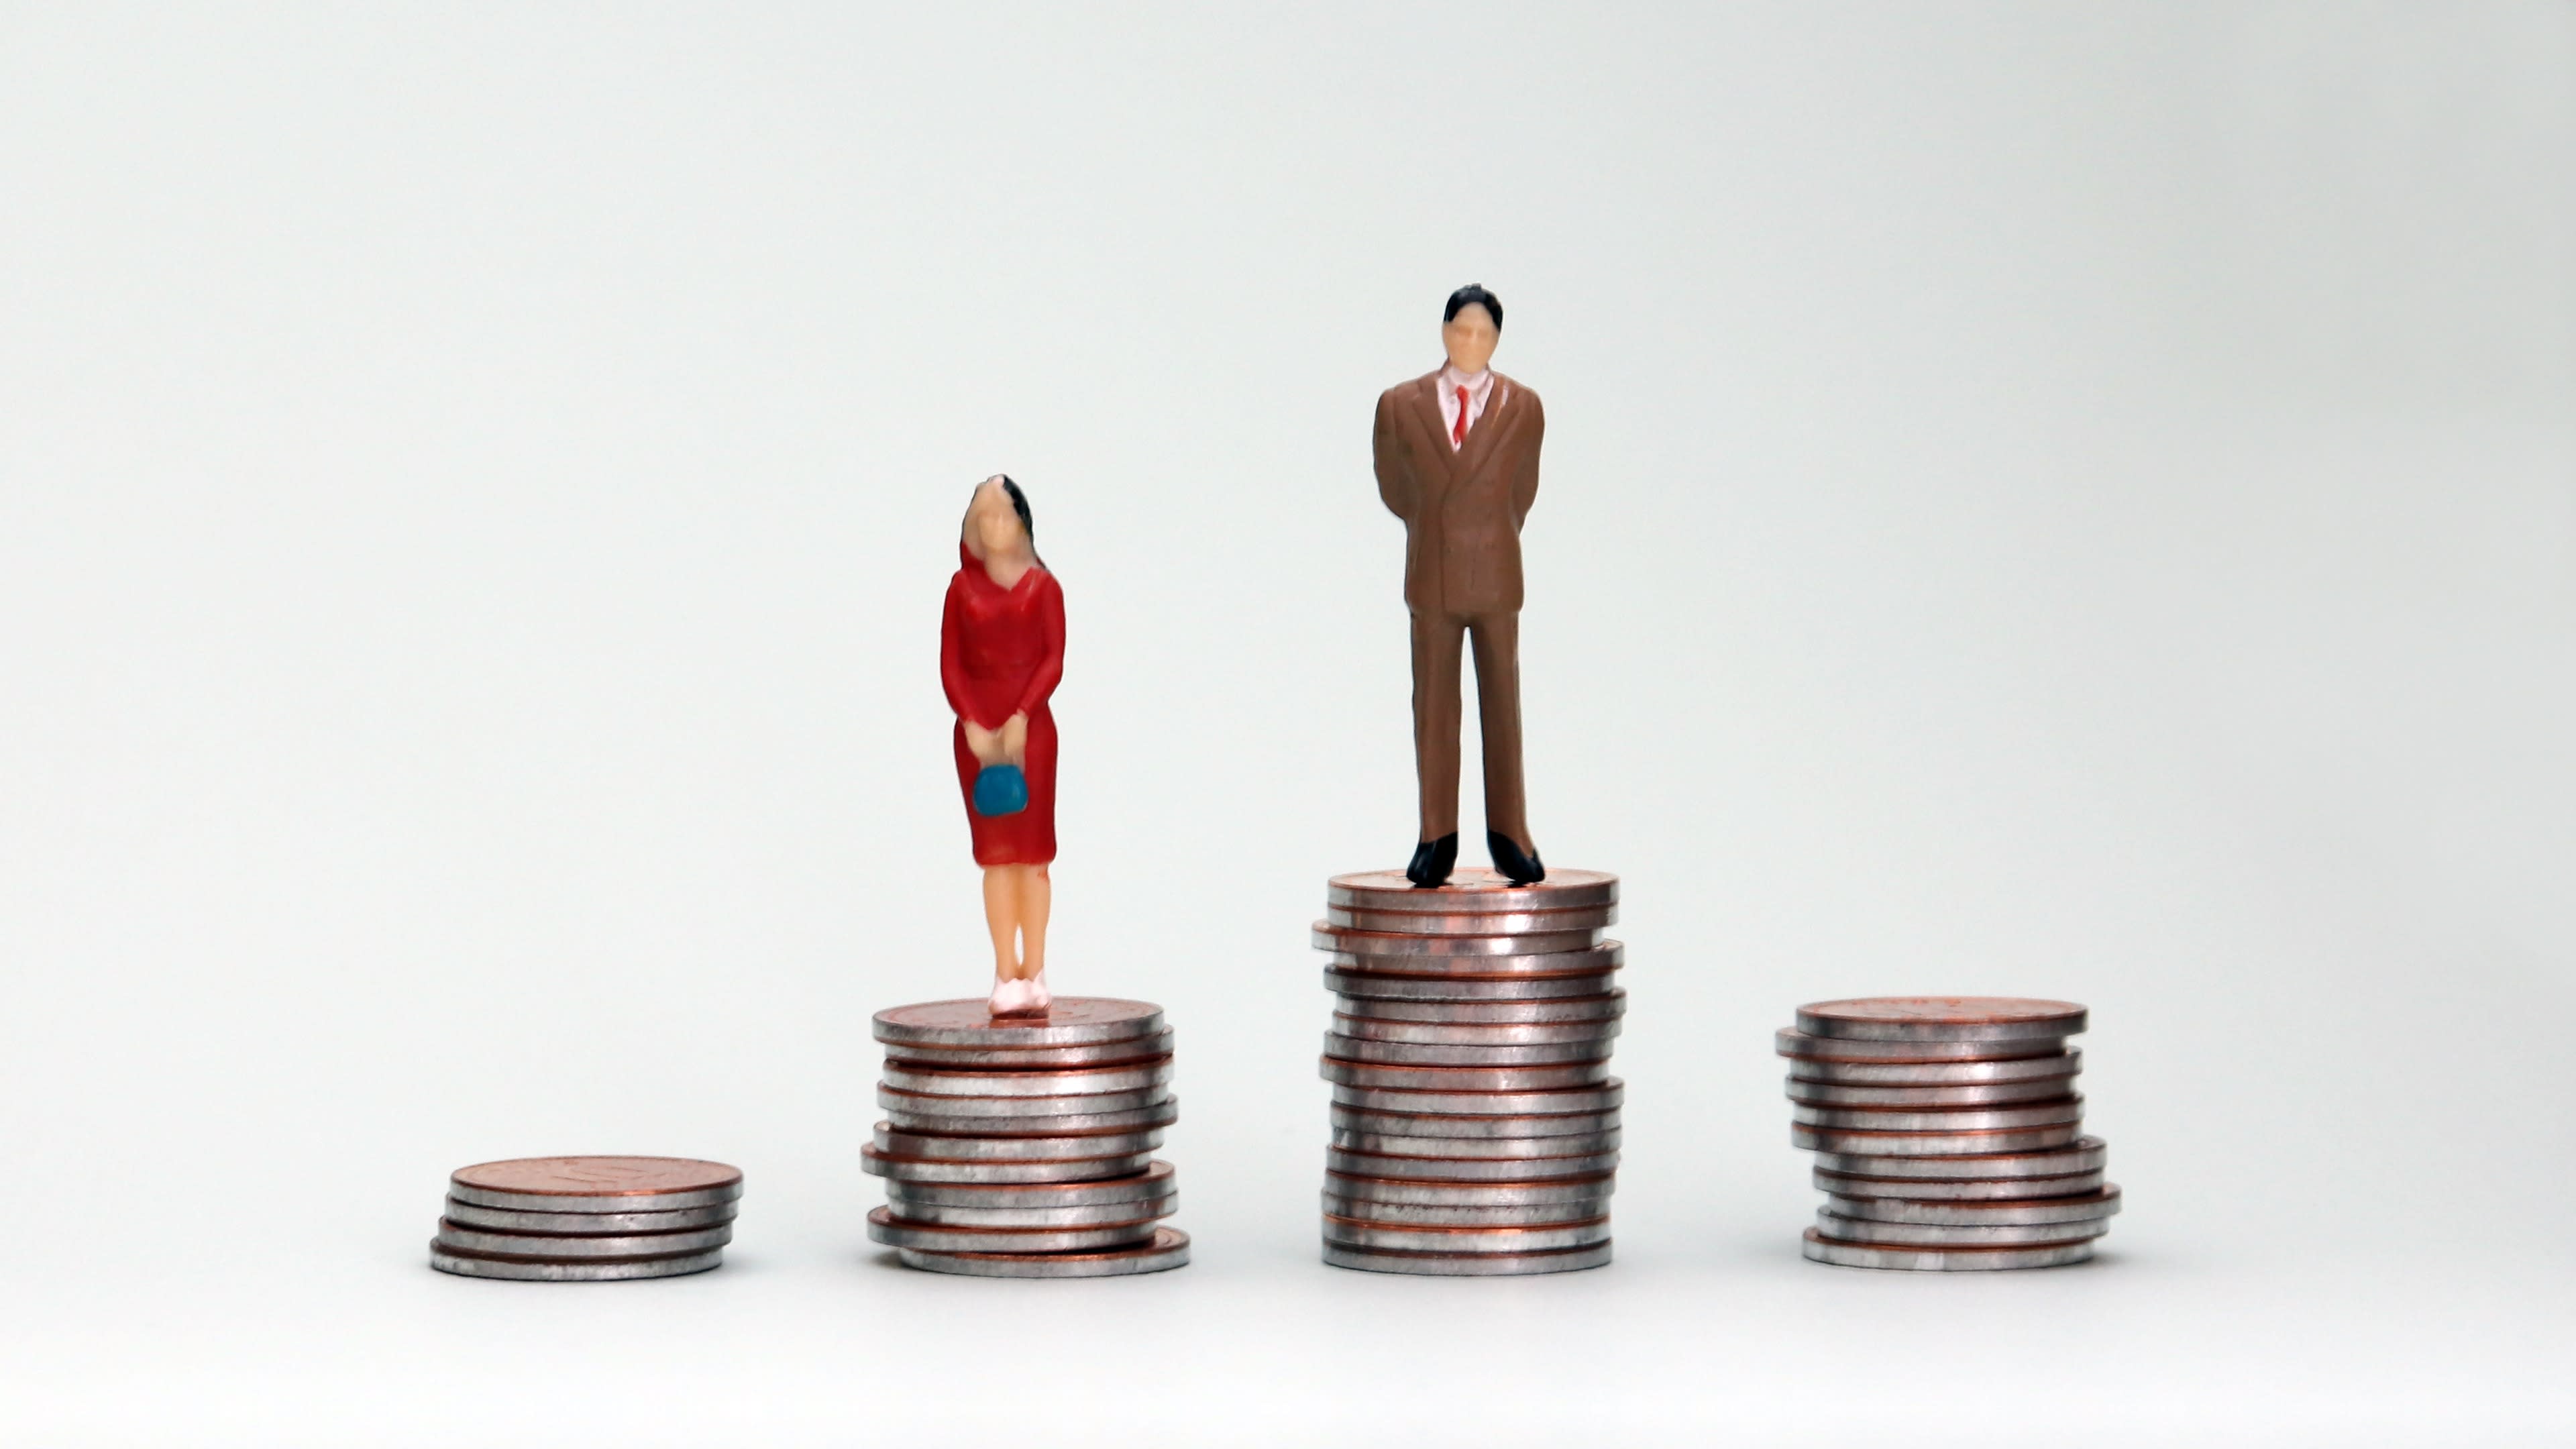 Female and male figurines standing on stacks of coins